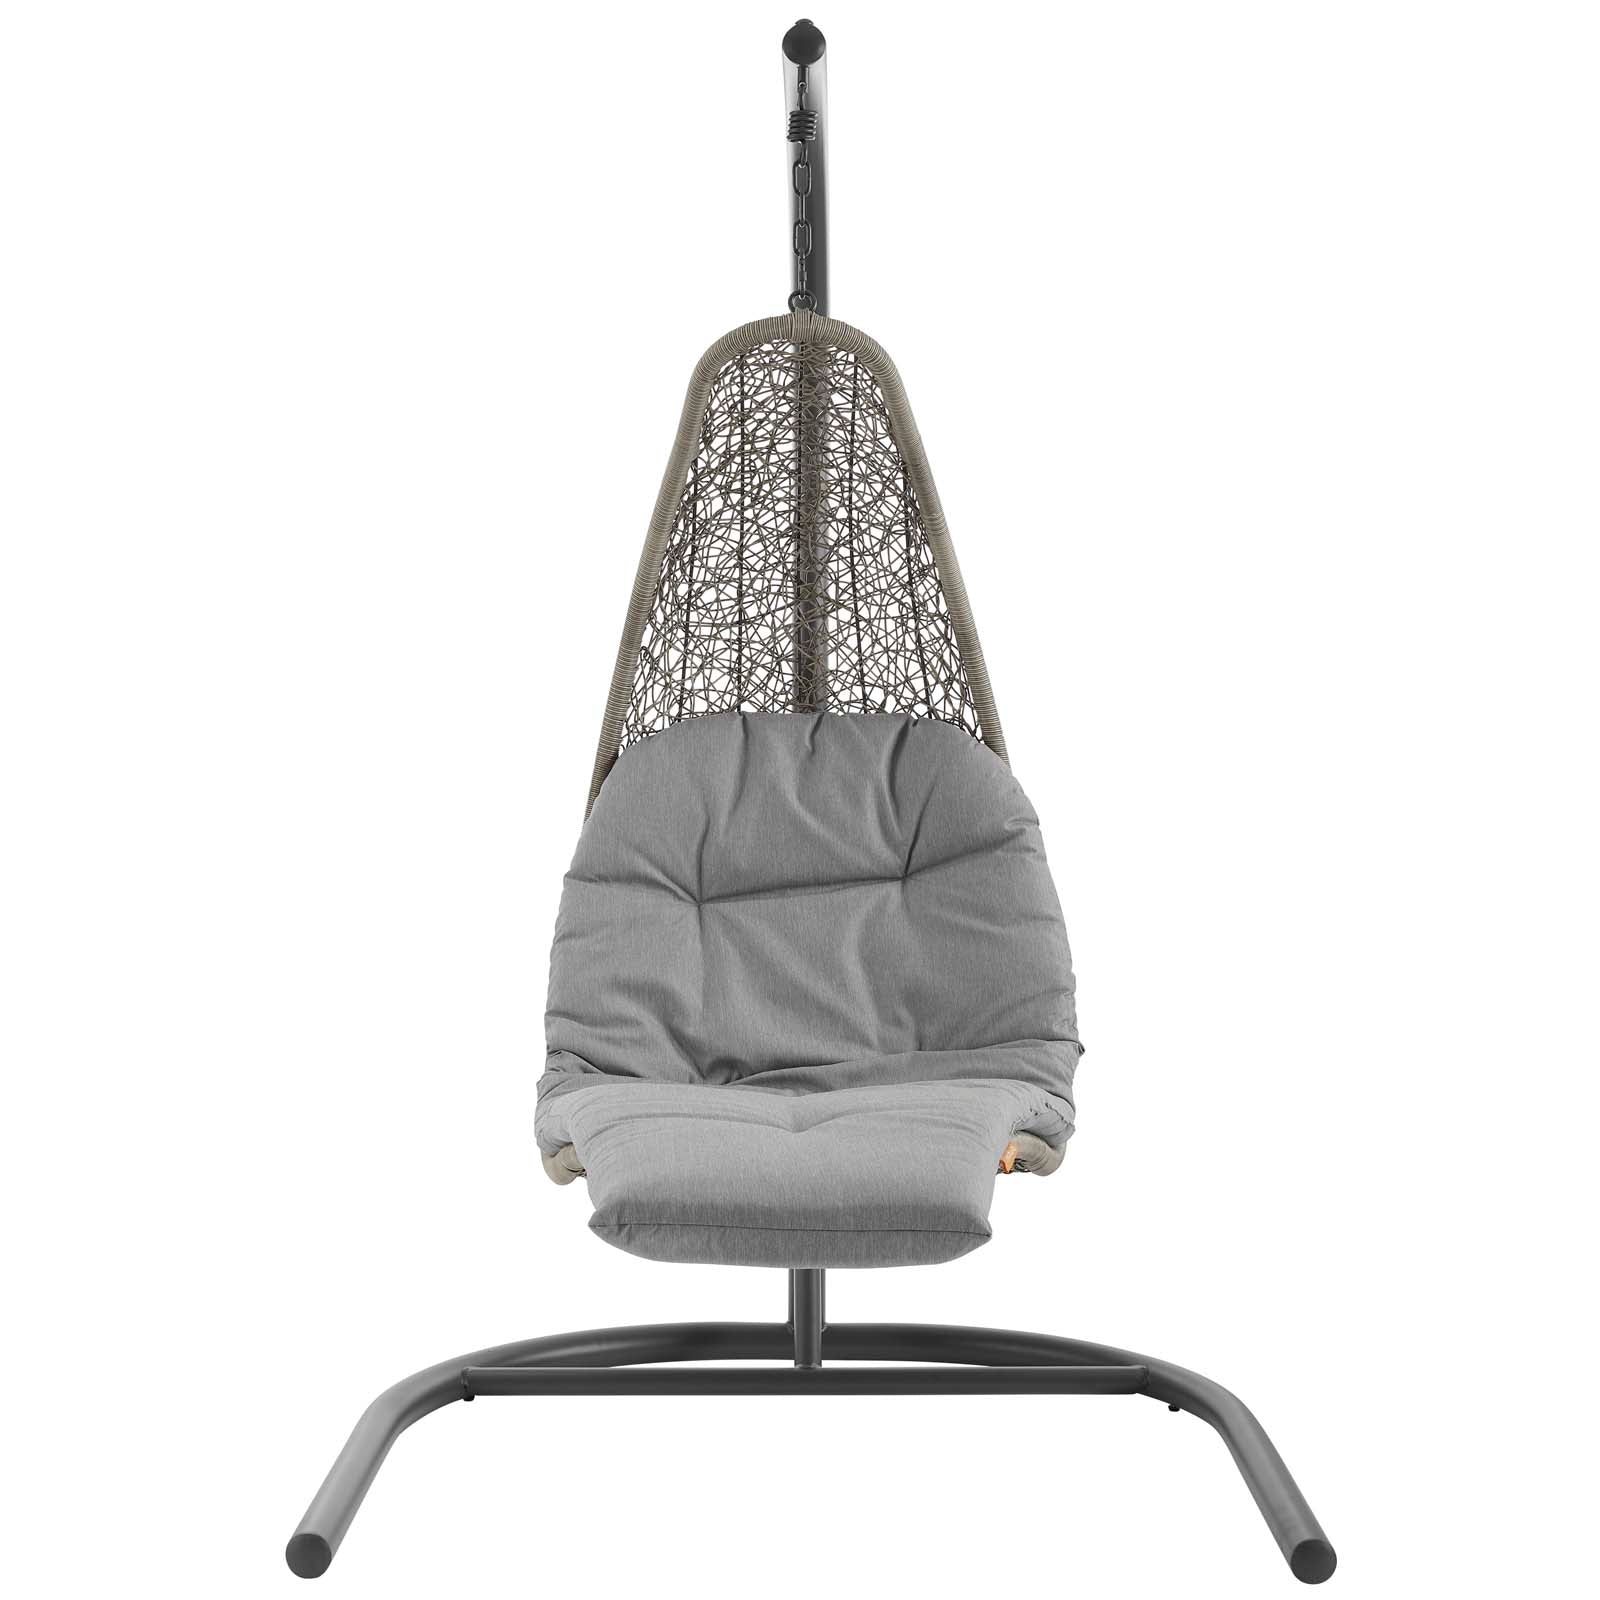 Modway Outdoor Swings - Landscape Hanging Chaise Lounge Outdoor Patio Swing Chair Light Gray